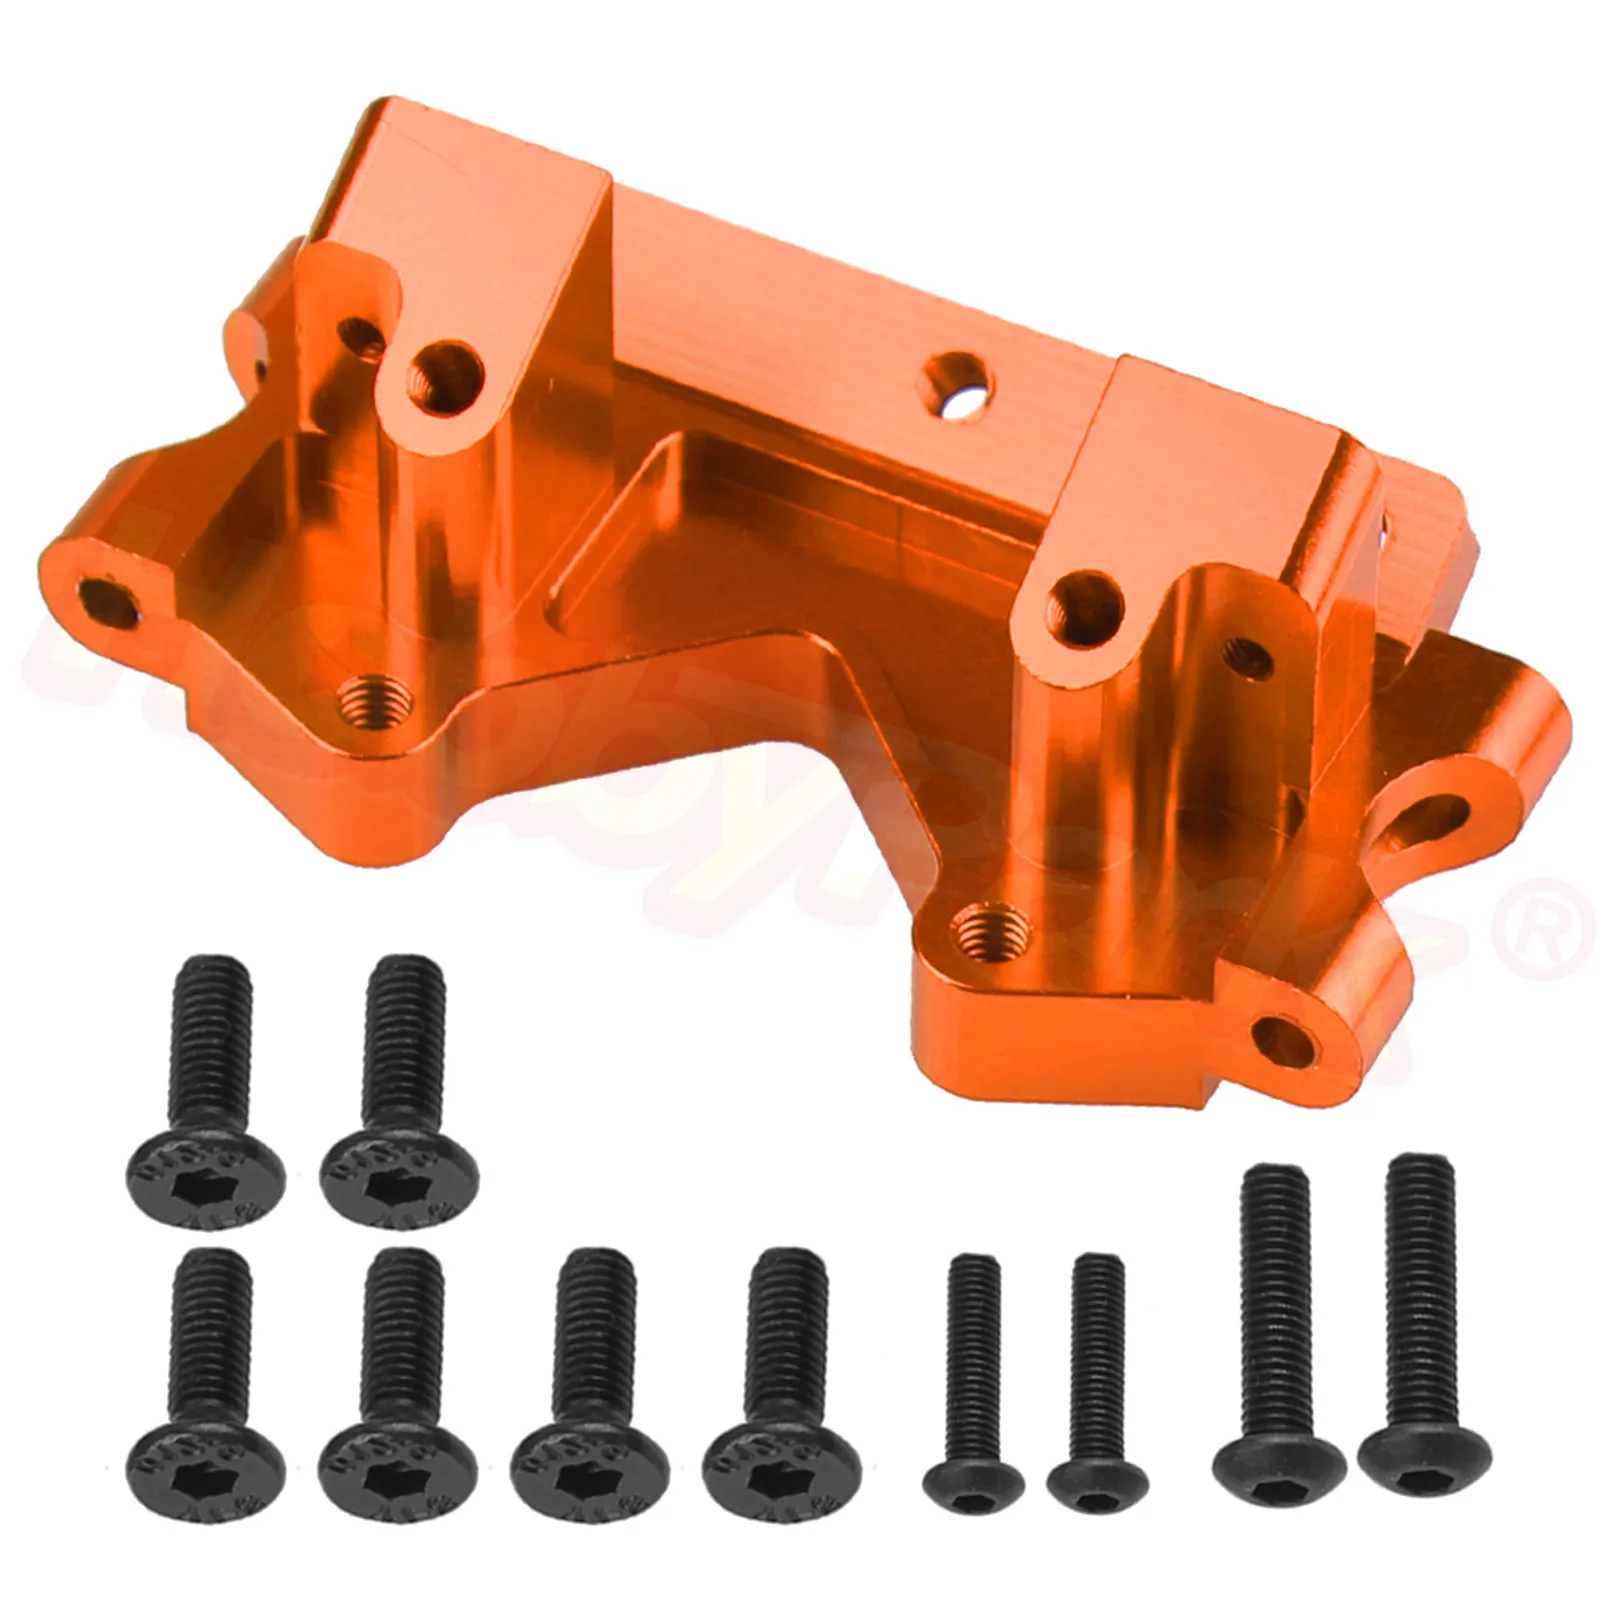 Hobbypark Aluminum Rear Stub Axle Carriers Upgrade Parts for 1/10 Traxxas 2WD Slash Stampede Rustler VXL Replacement of 3752 Bandit VXL Orange-Anodized 